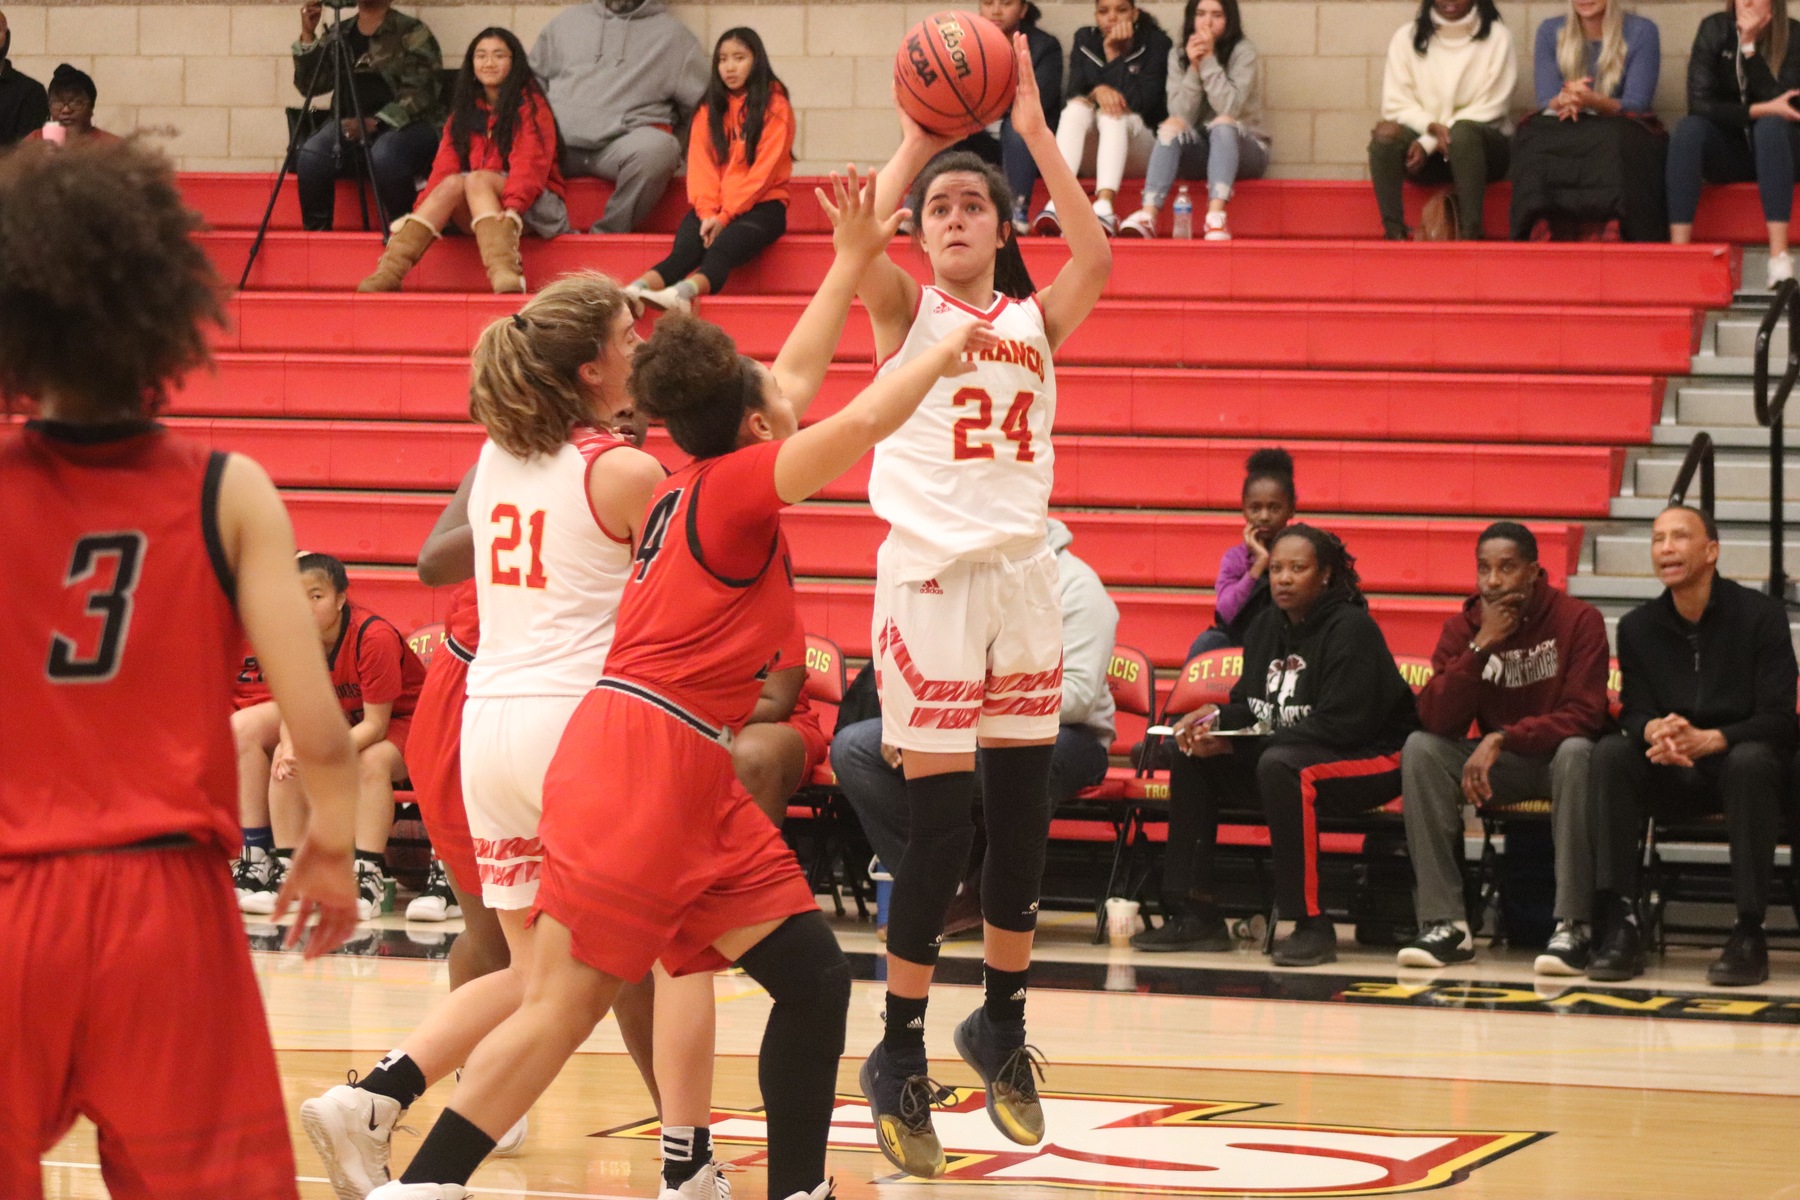 Basketball Opens with Foundation Win over West Campus